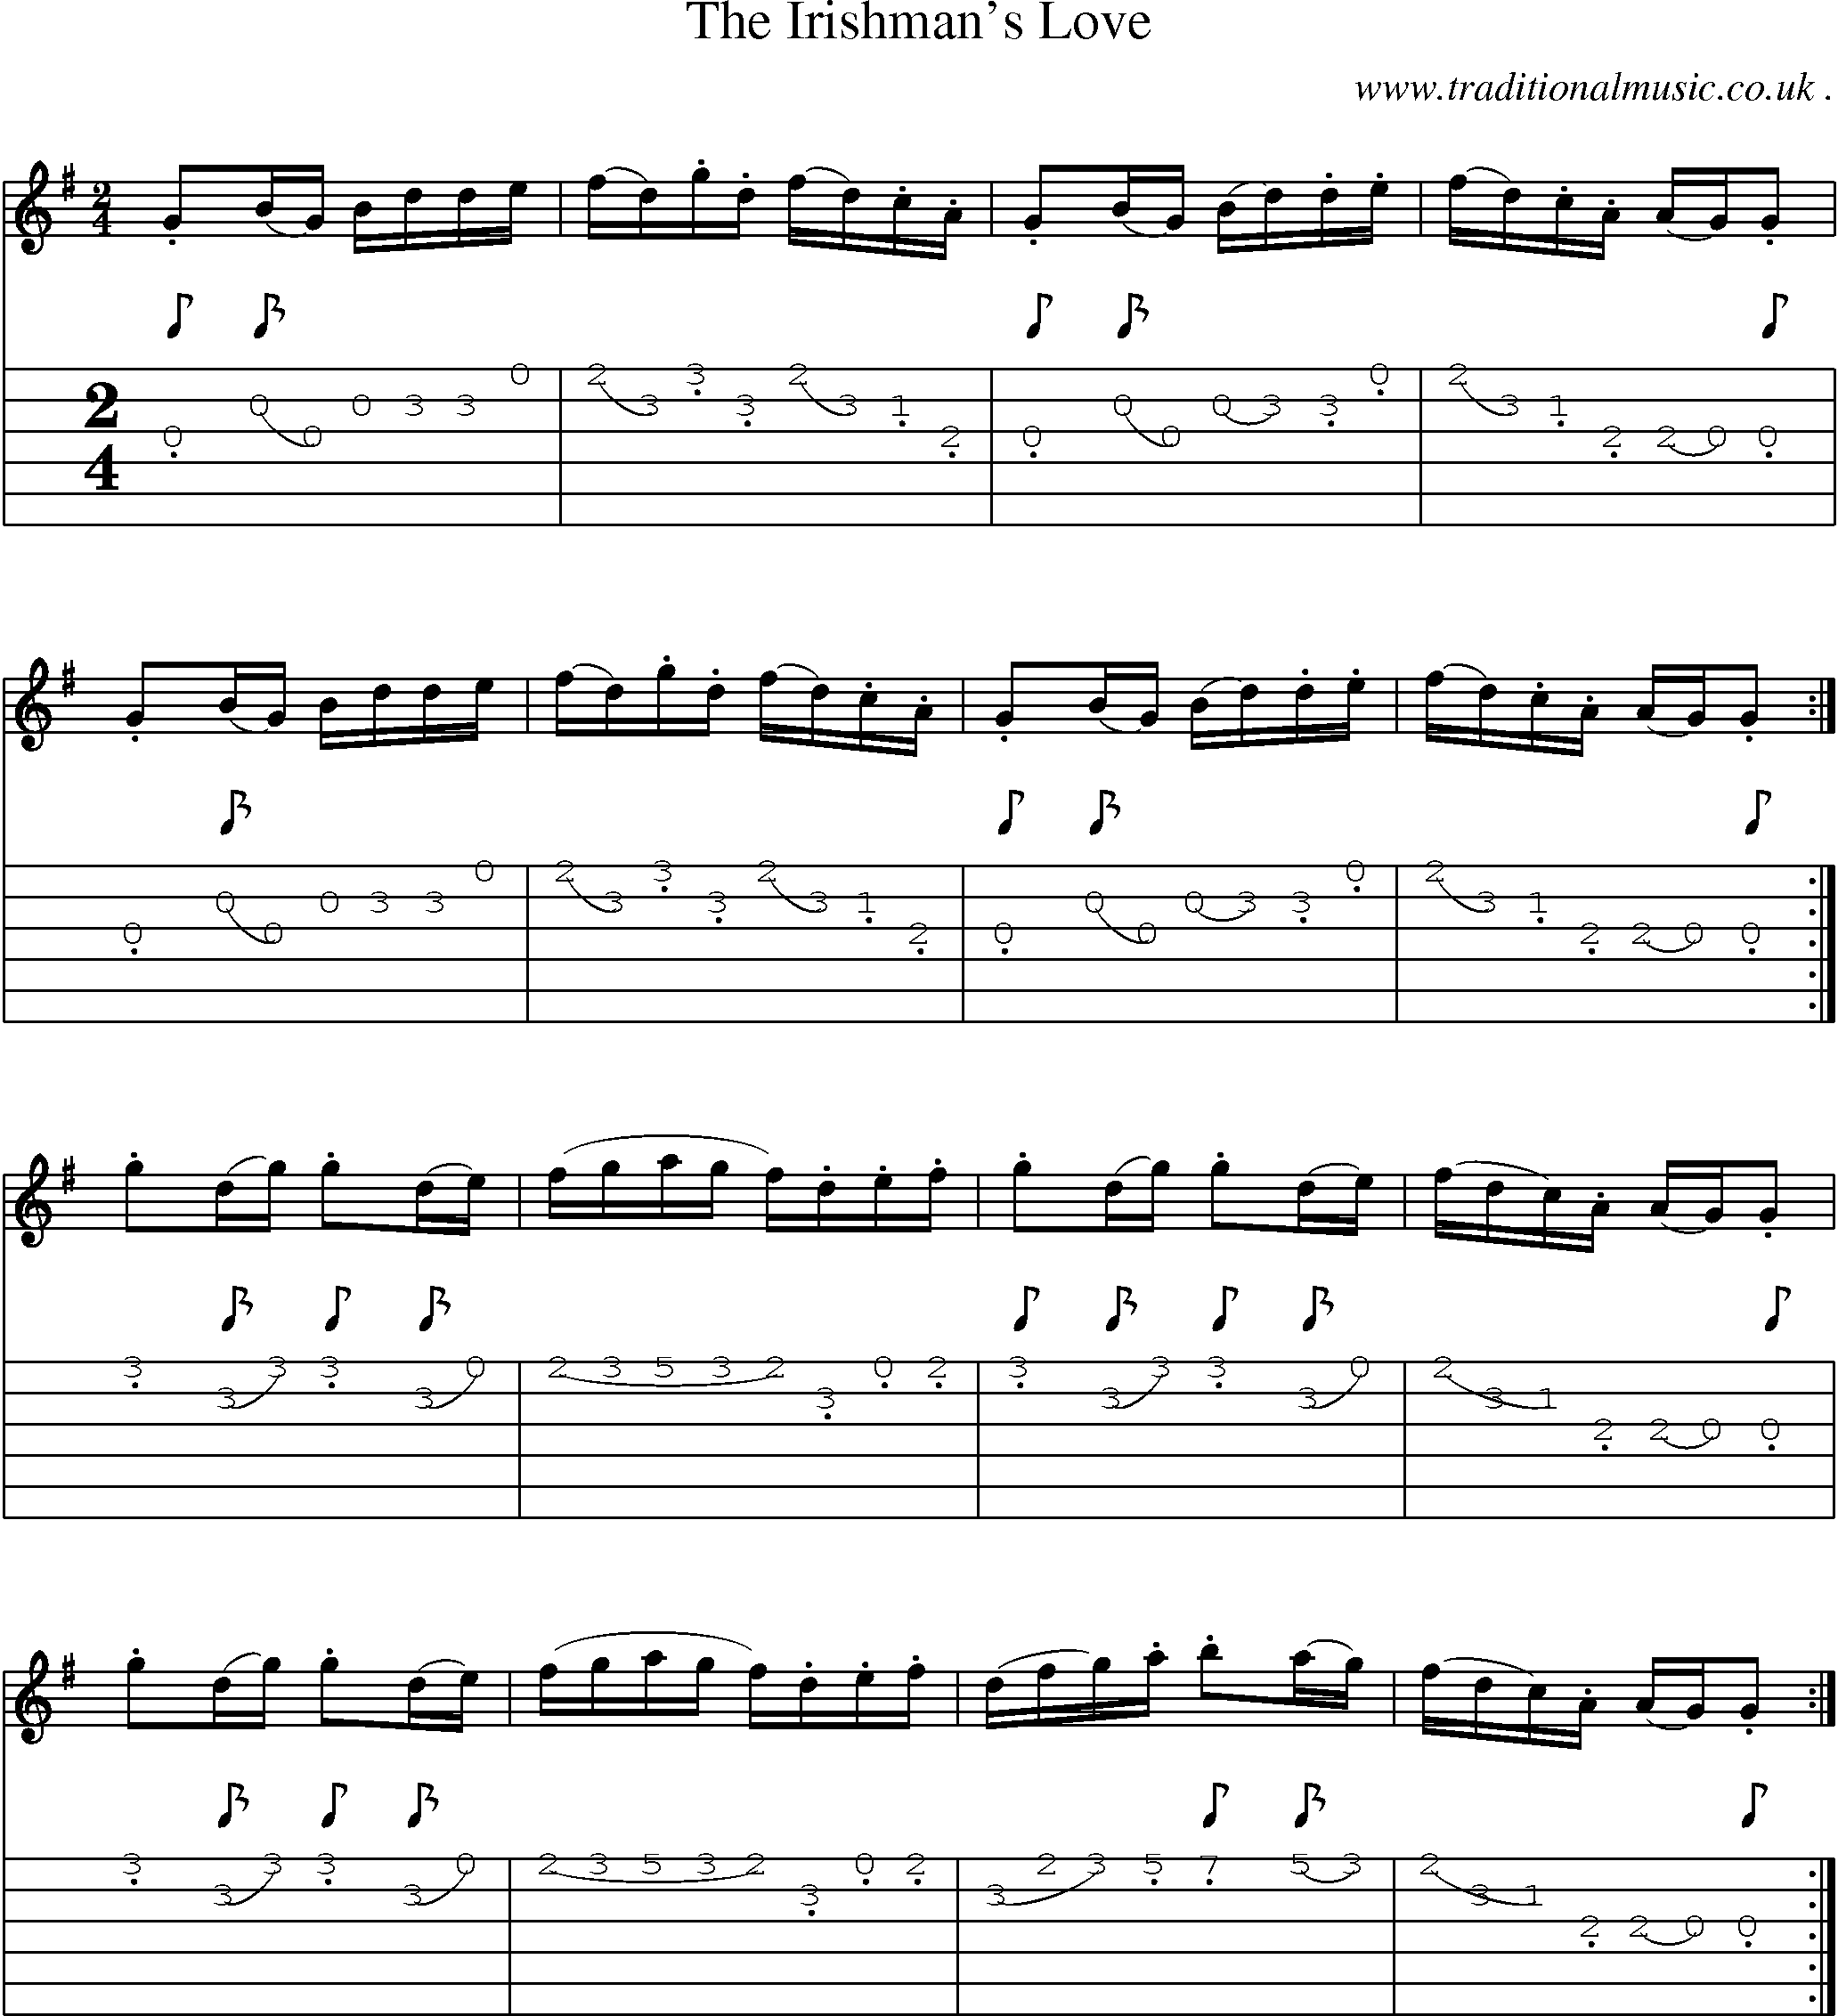 Sheet-Music and Guitar Tabs for The Irishmans Love